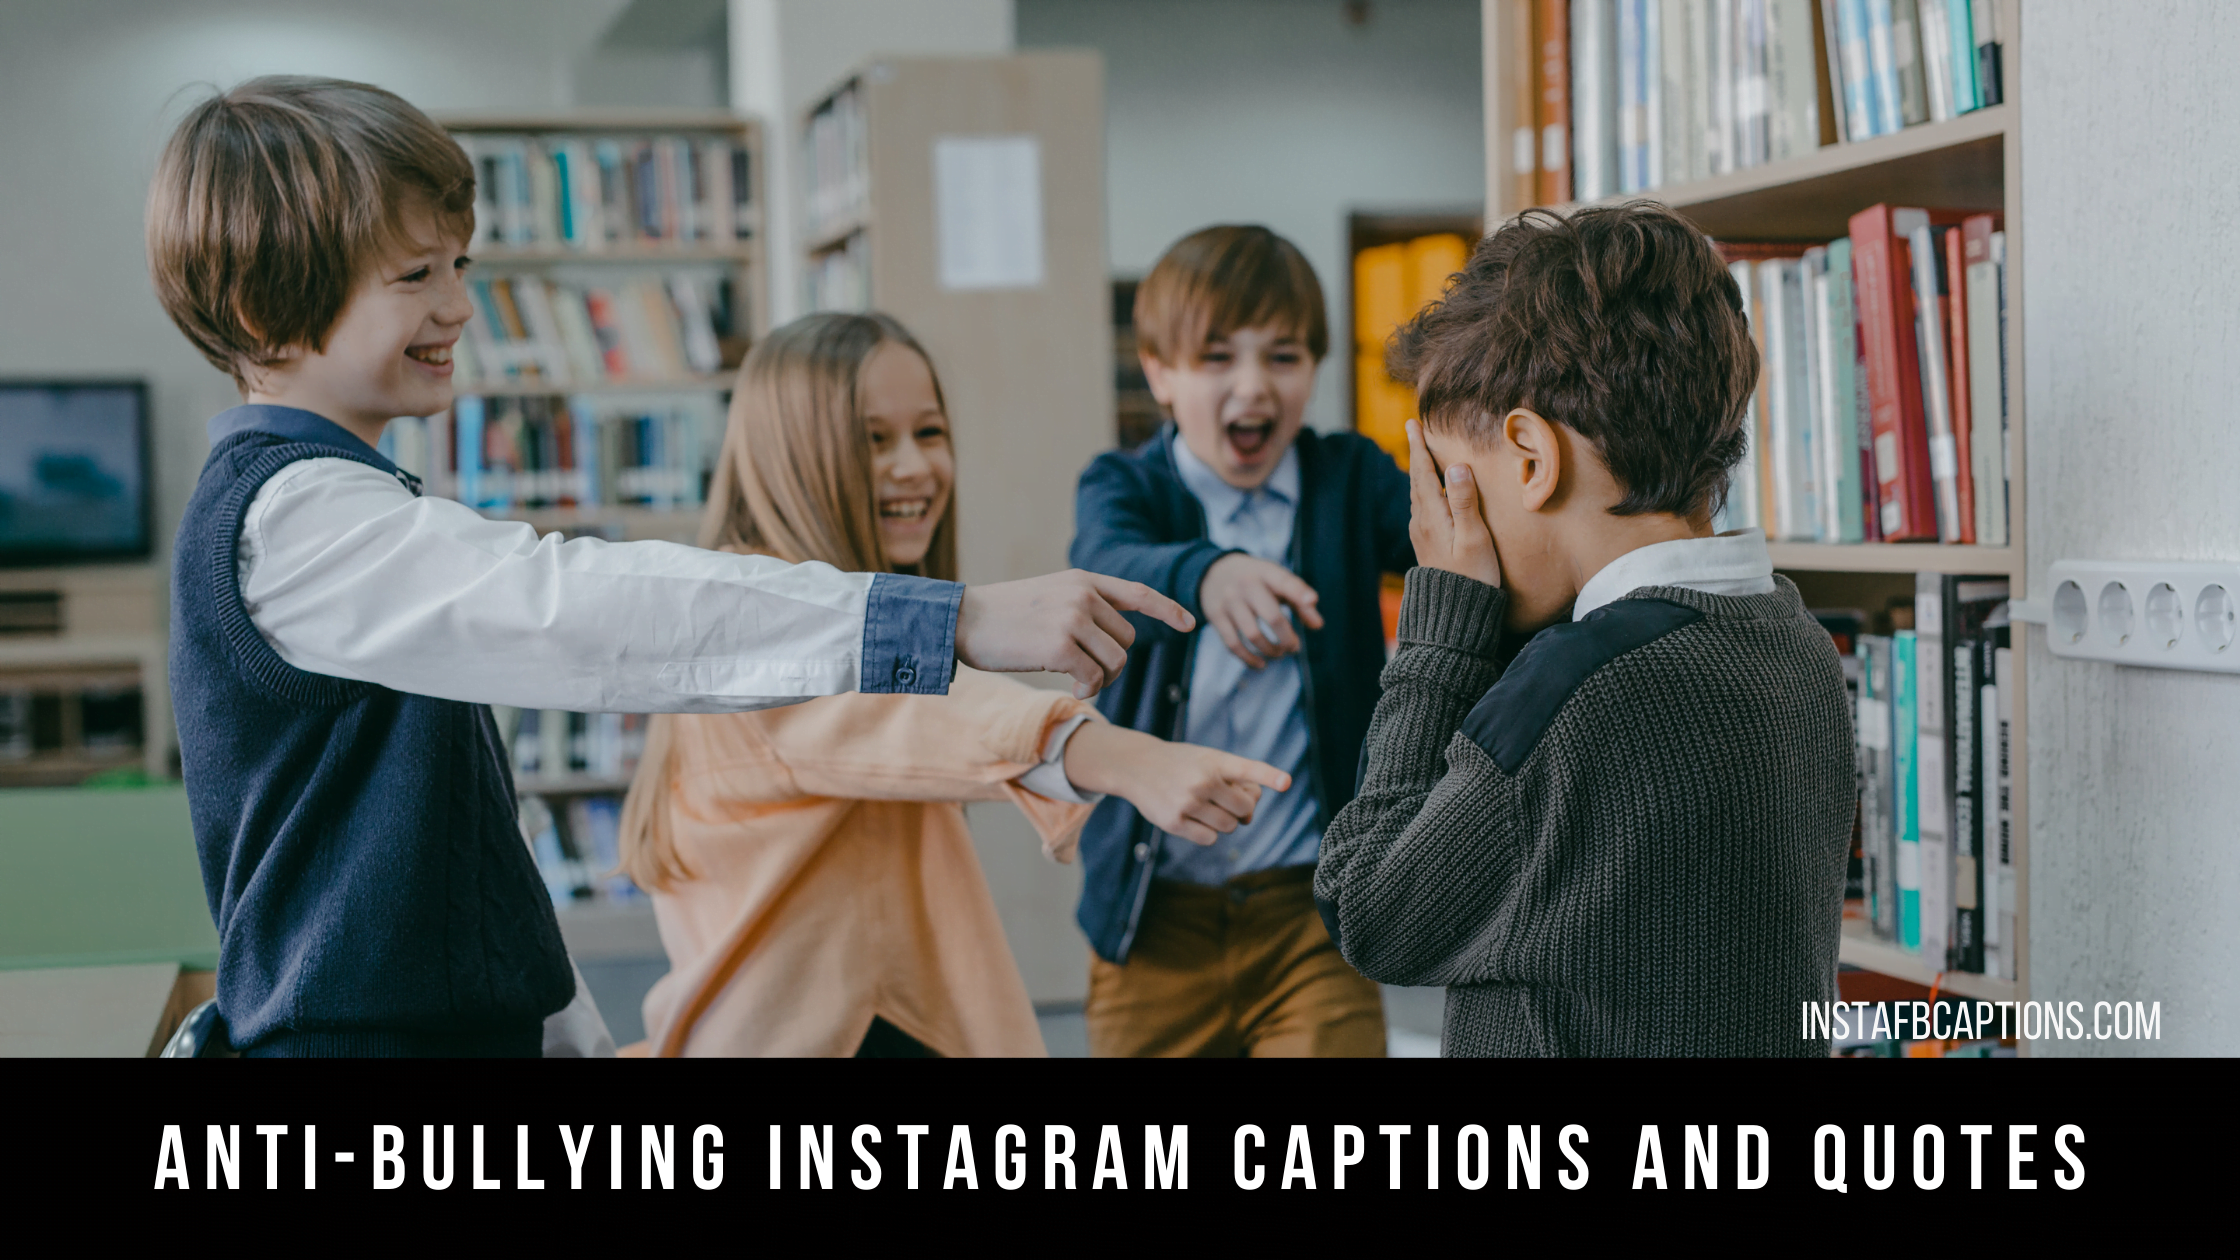 Anti Bullying Instagram Captions And Quotes  - Anti Bullying Instagram Captions and Quotes - [New] Anti Bullying Captions for Instagram in 2023